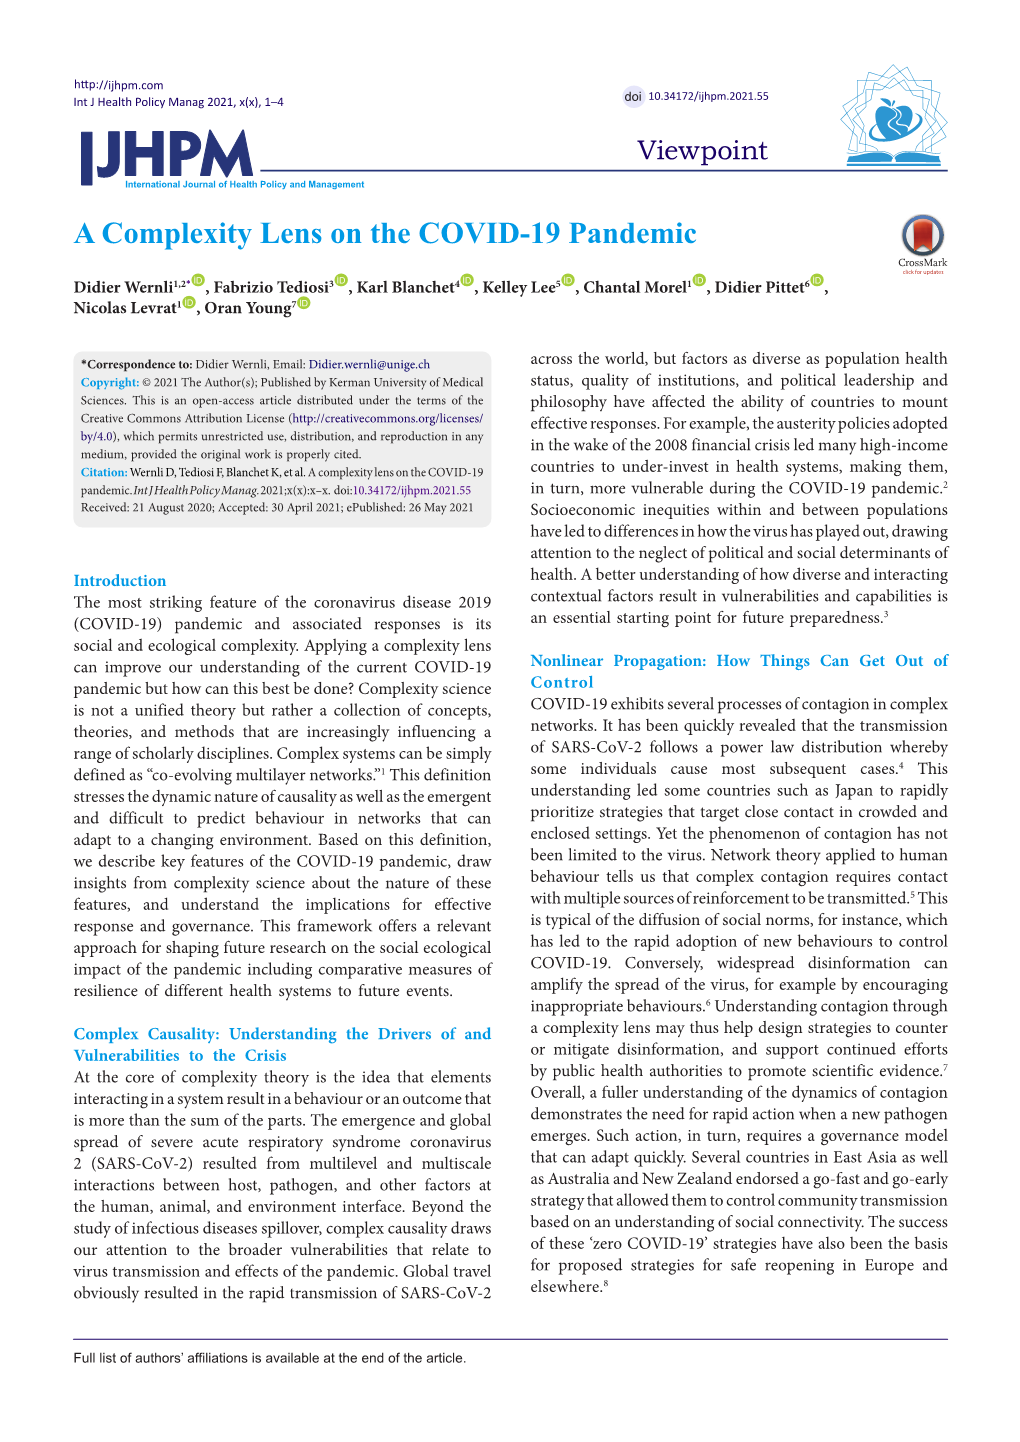 A Complexity Lens on the COVID-19 Pandemic